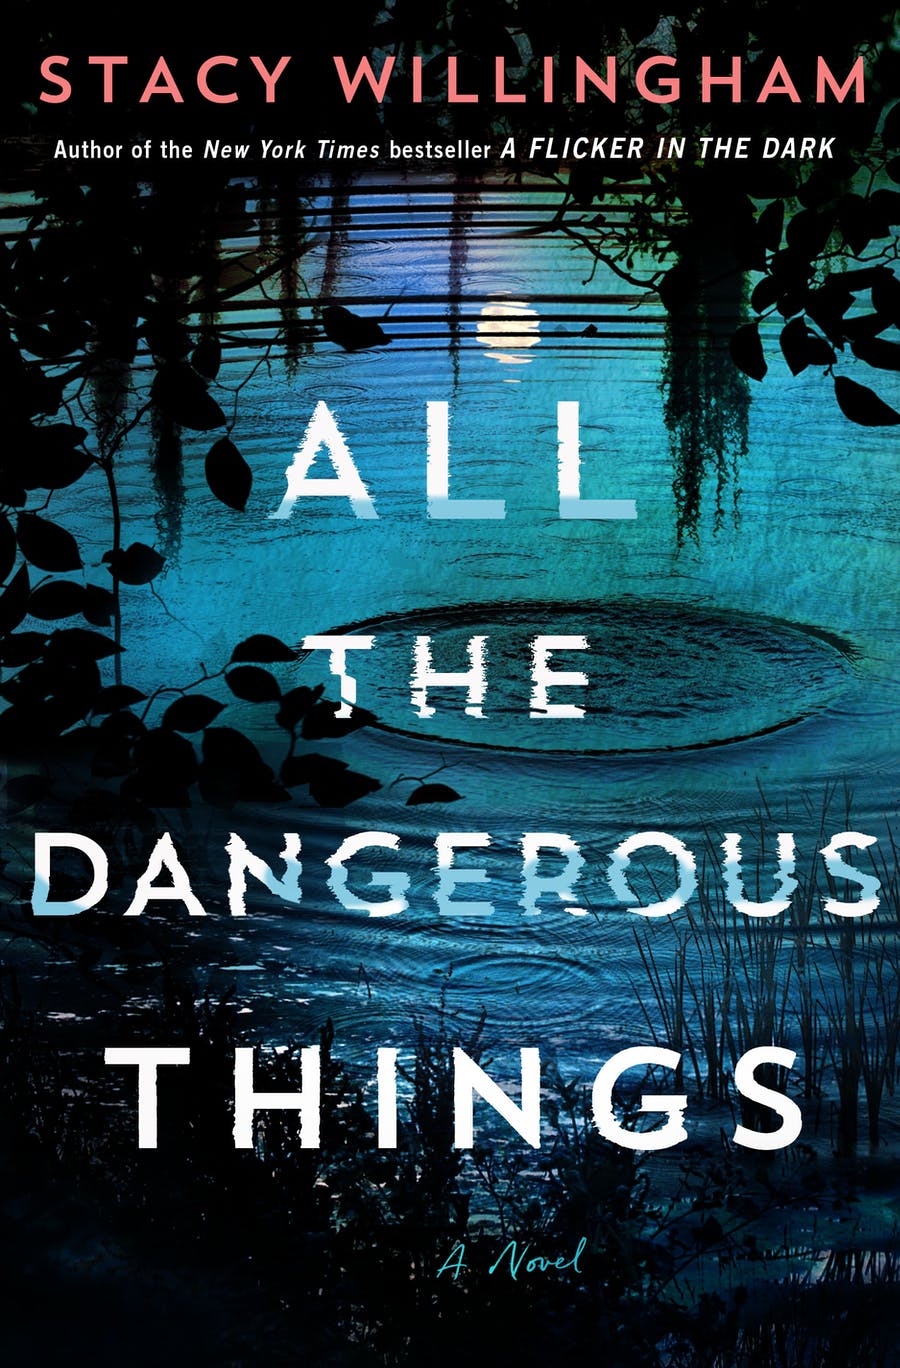 All The Dangerous Things by Stacy Willingham